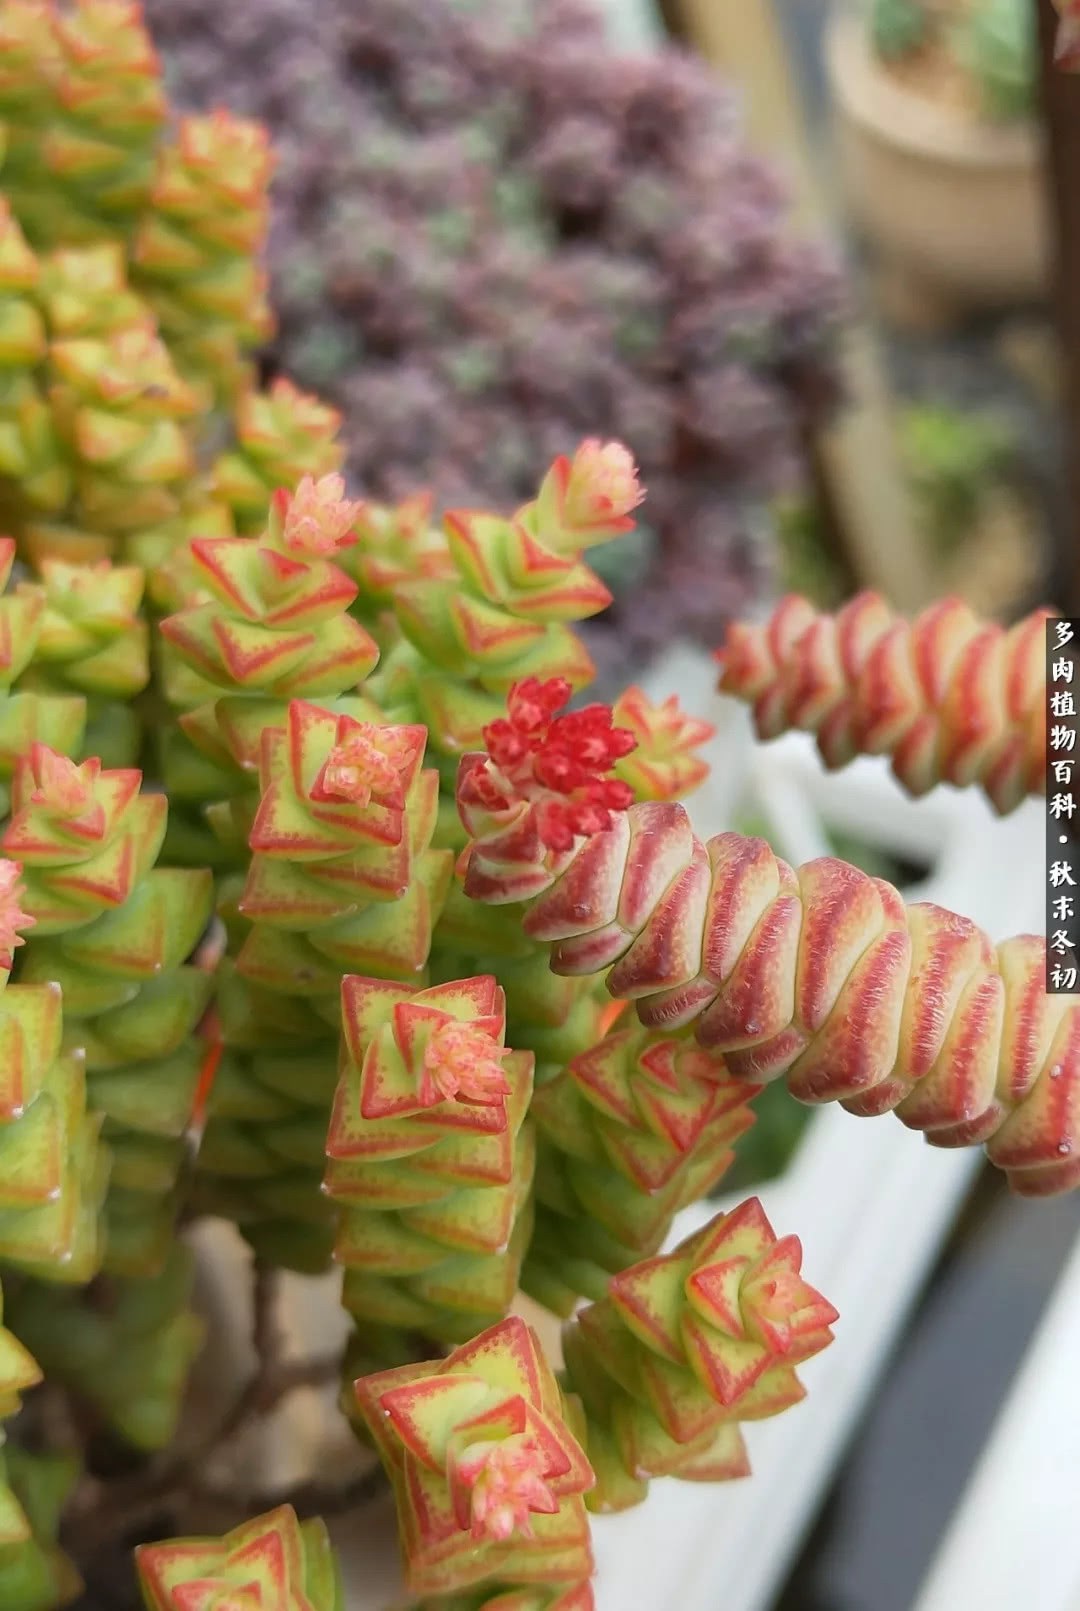 The most beautiful season for succulent plants in the open hanging area has arrived.